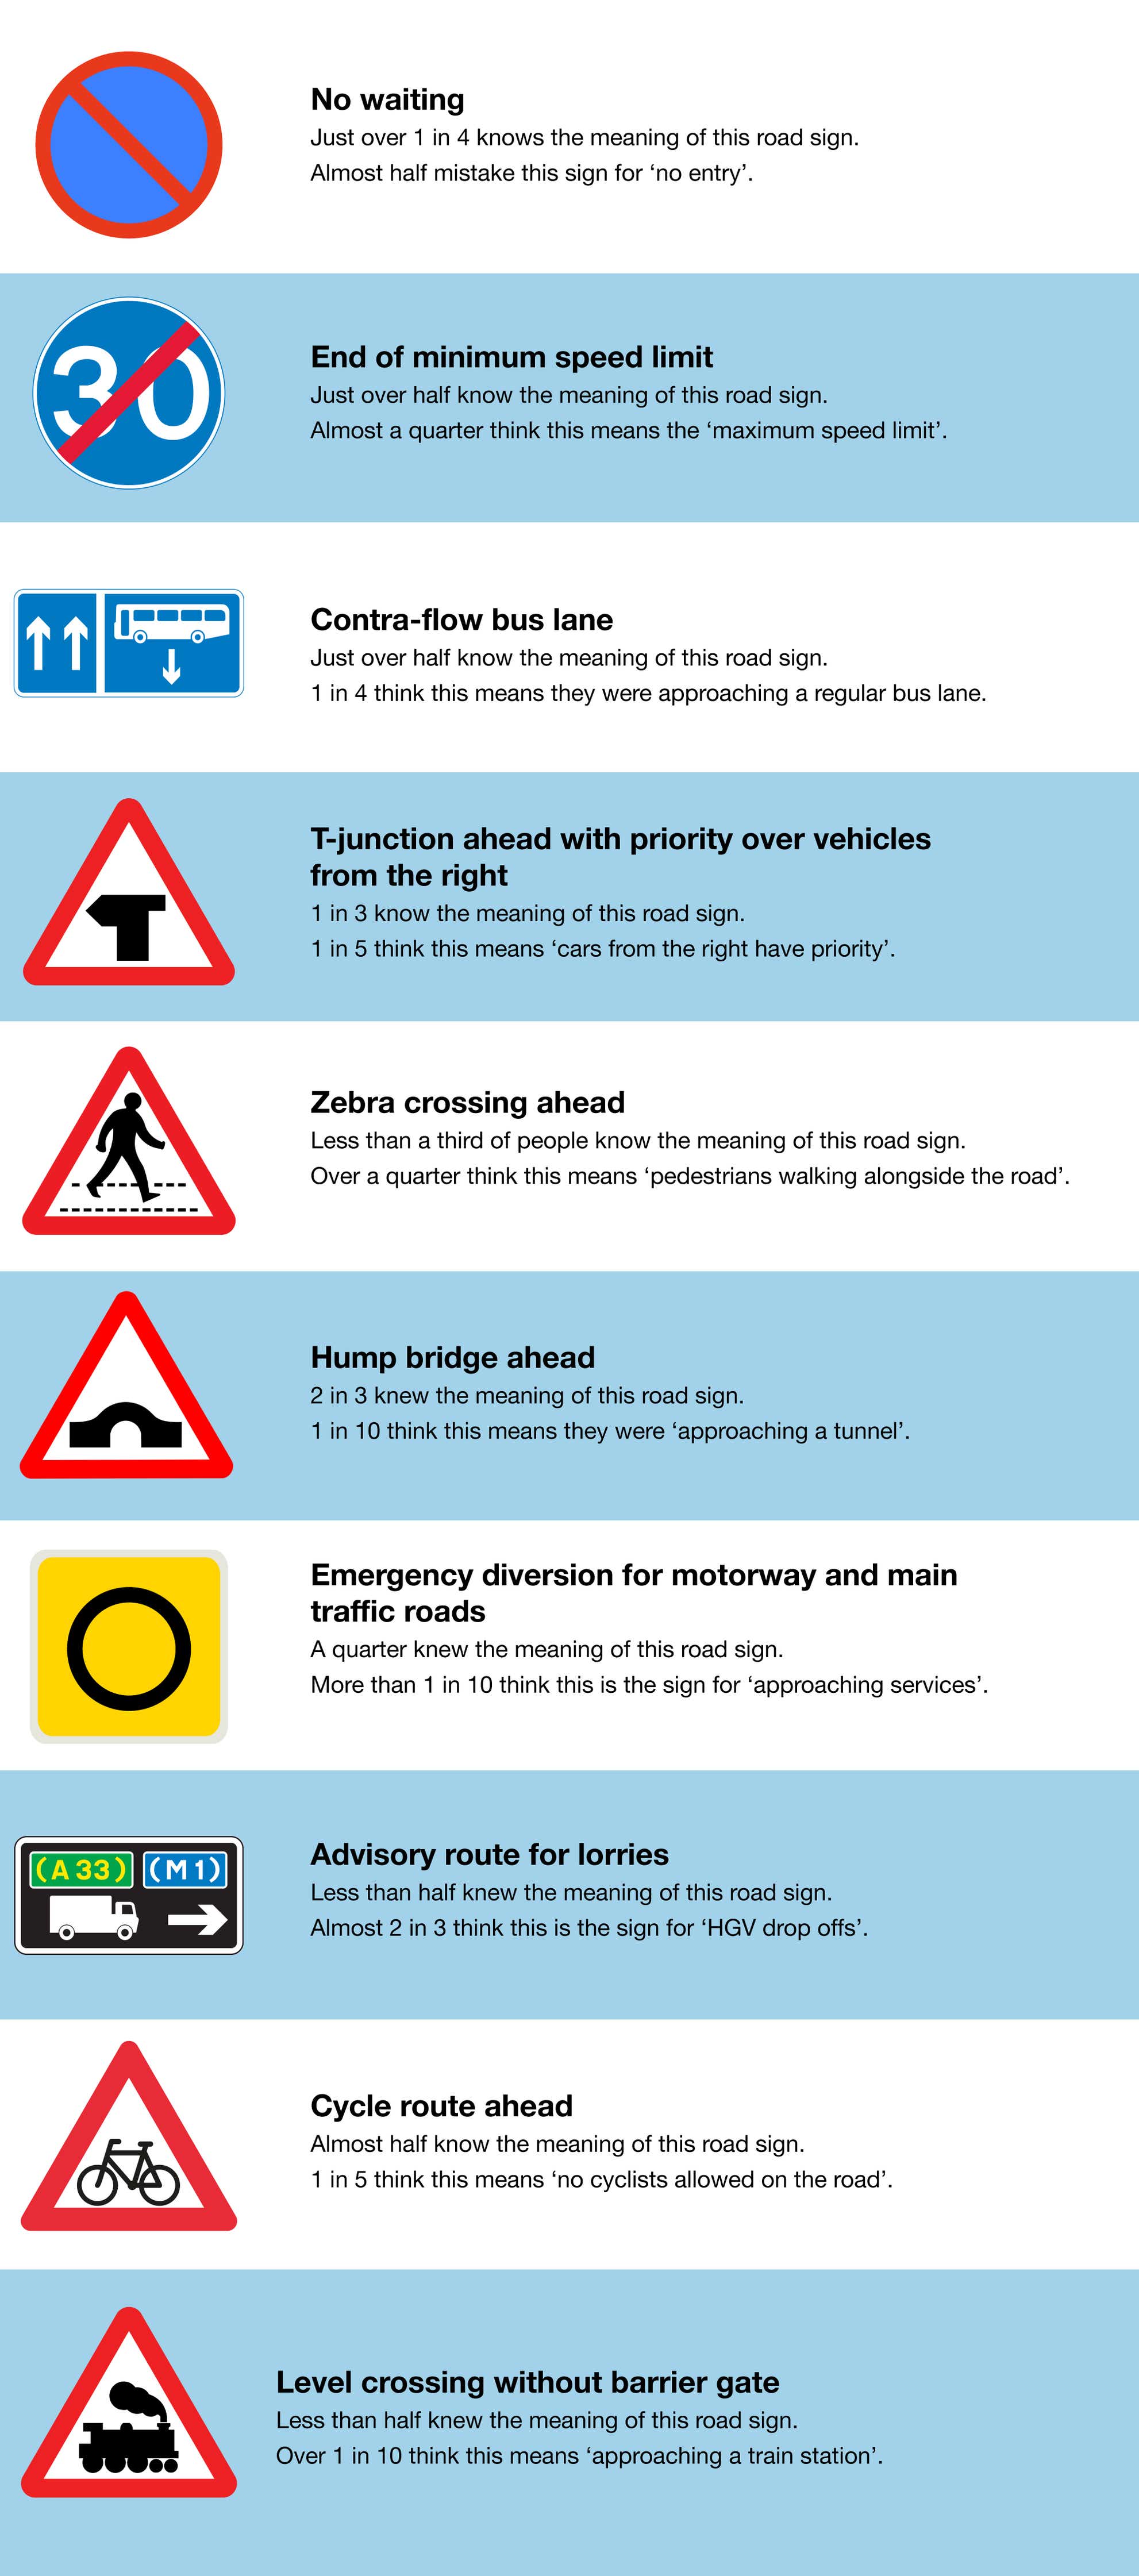 Brits reveal how well they know UK and EU road signs